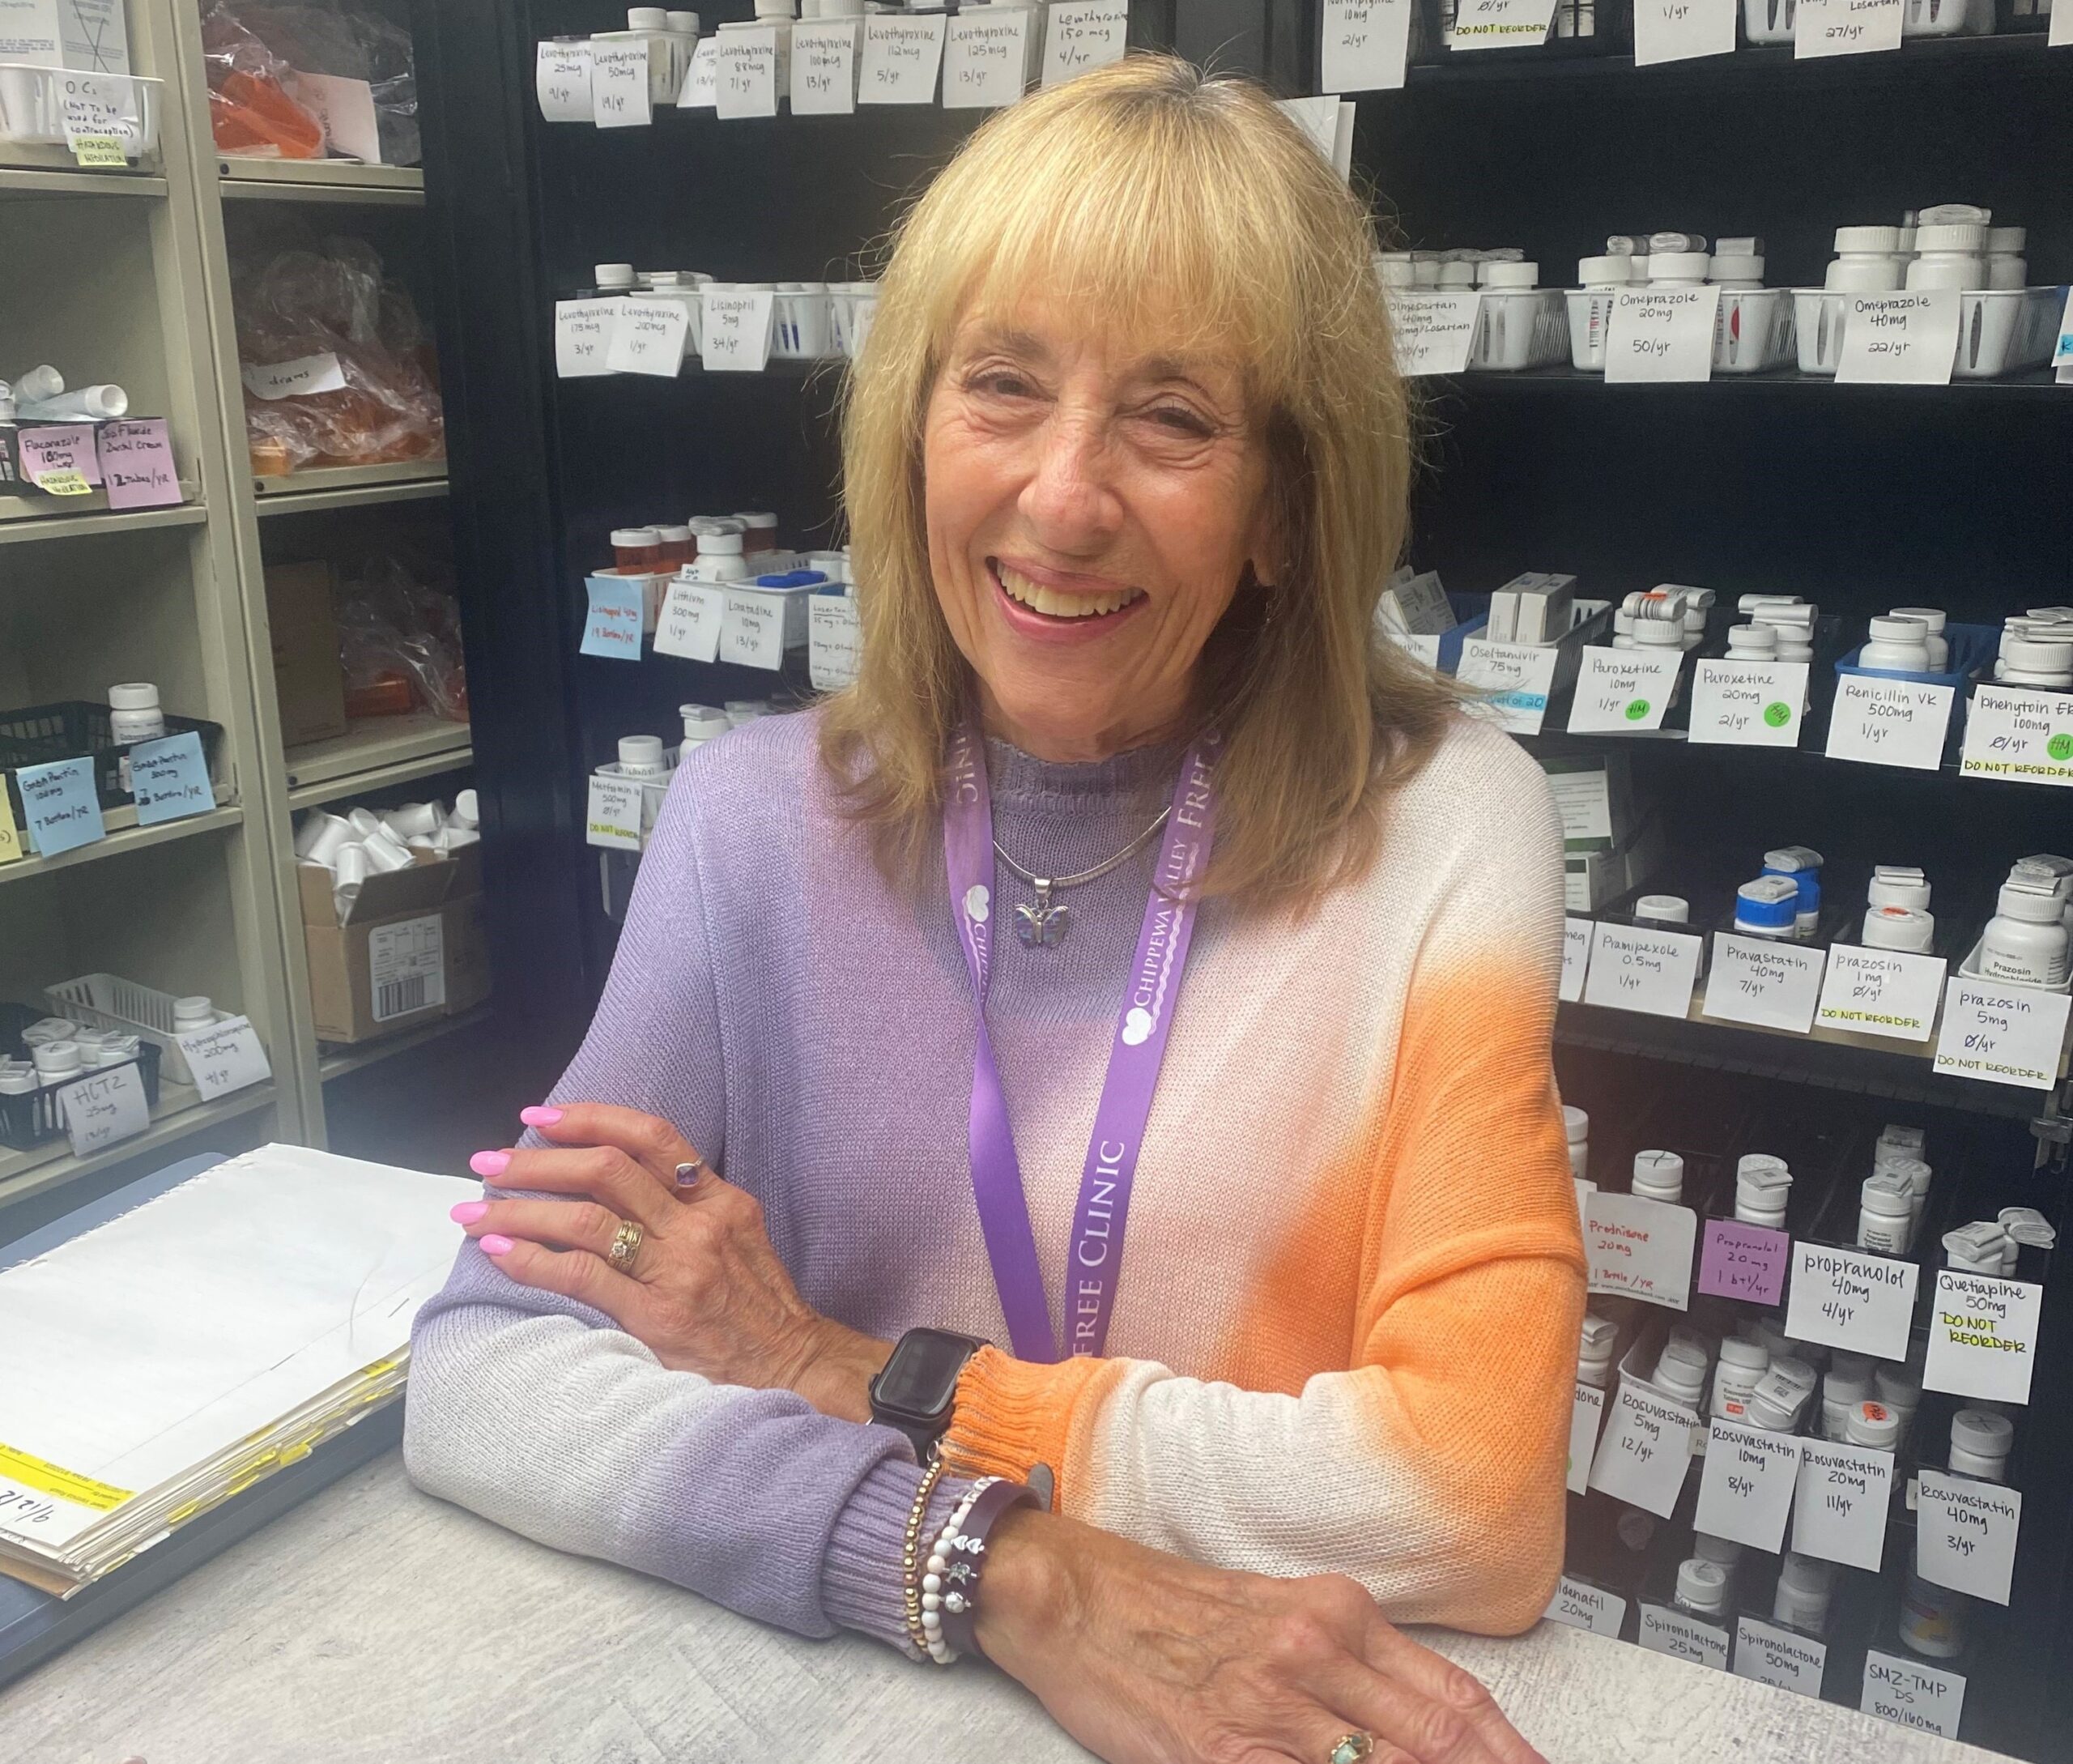 Smiling woman with blonde hair working in a pharmacy